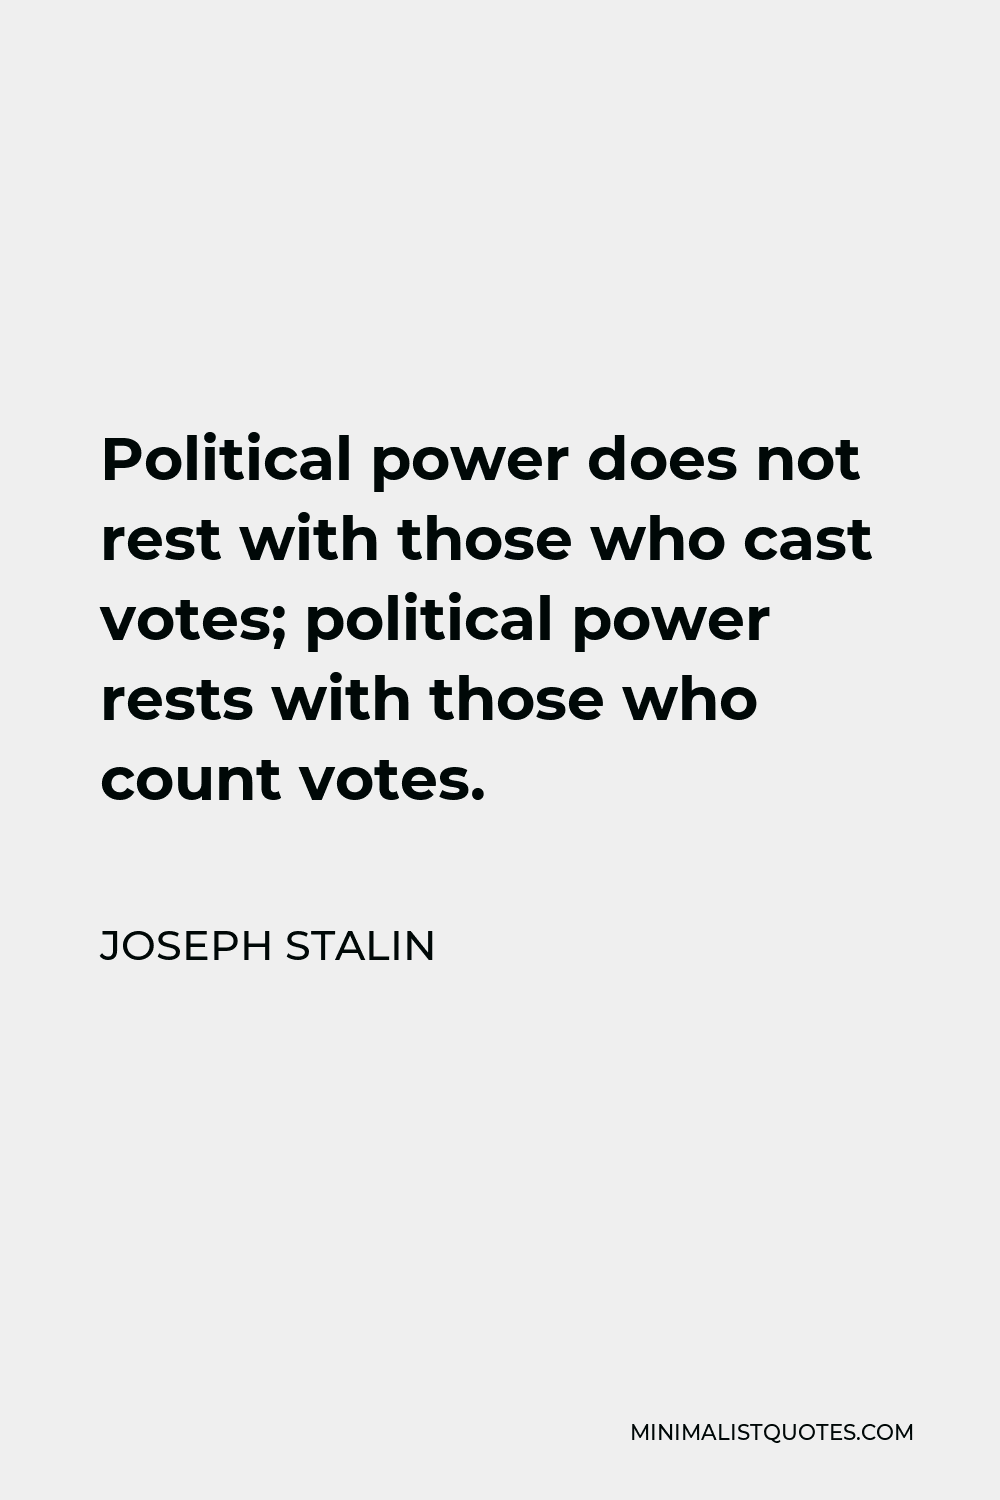 Joseph Stalin Quote - Political power does not rest with those who cast votes; political power rests with those who count votes.